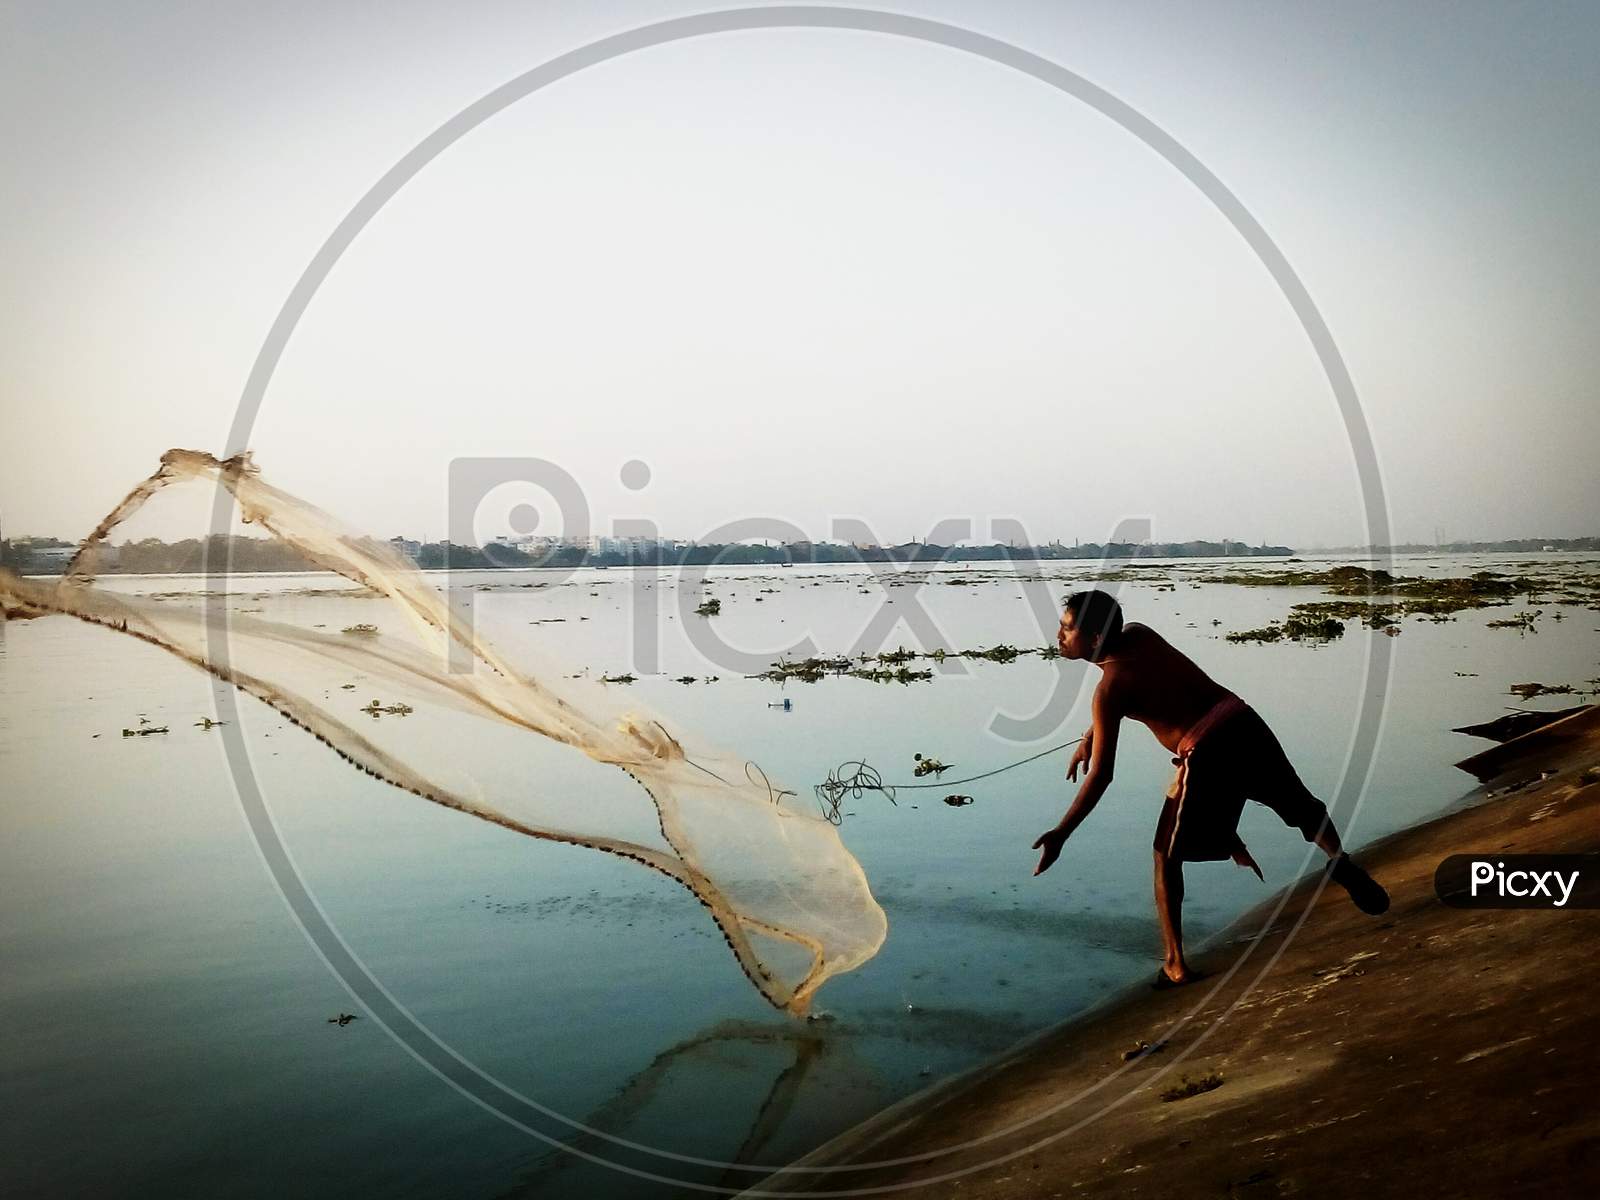 Image of Fisher Man, Spreading/throwing net, Fishing.-QN300668-Picxy